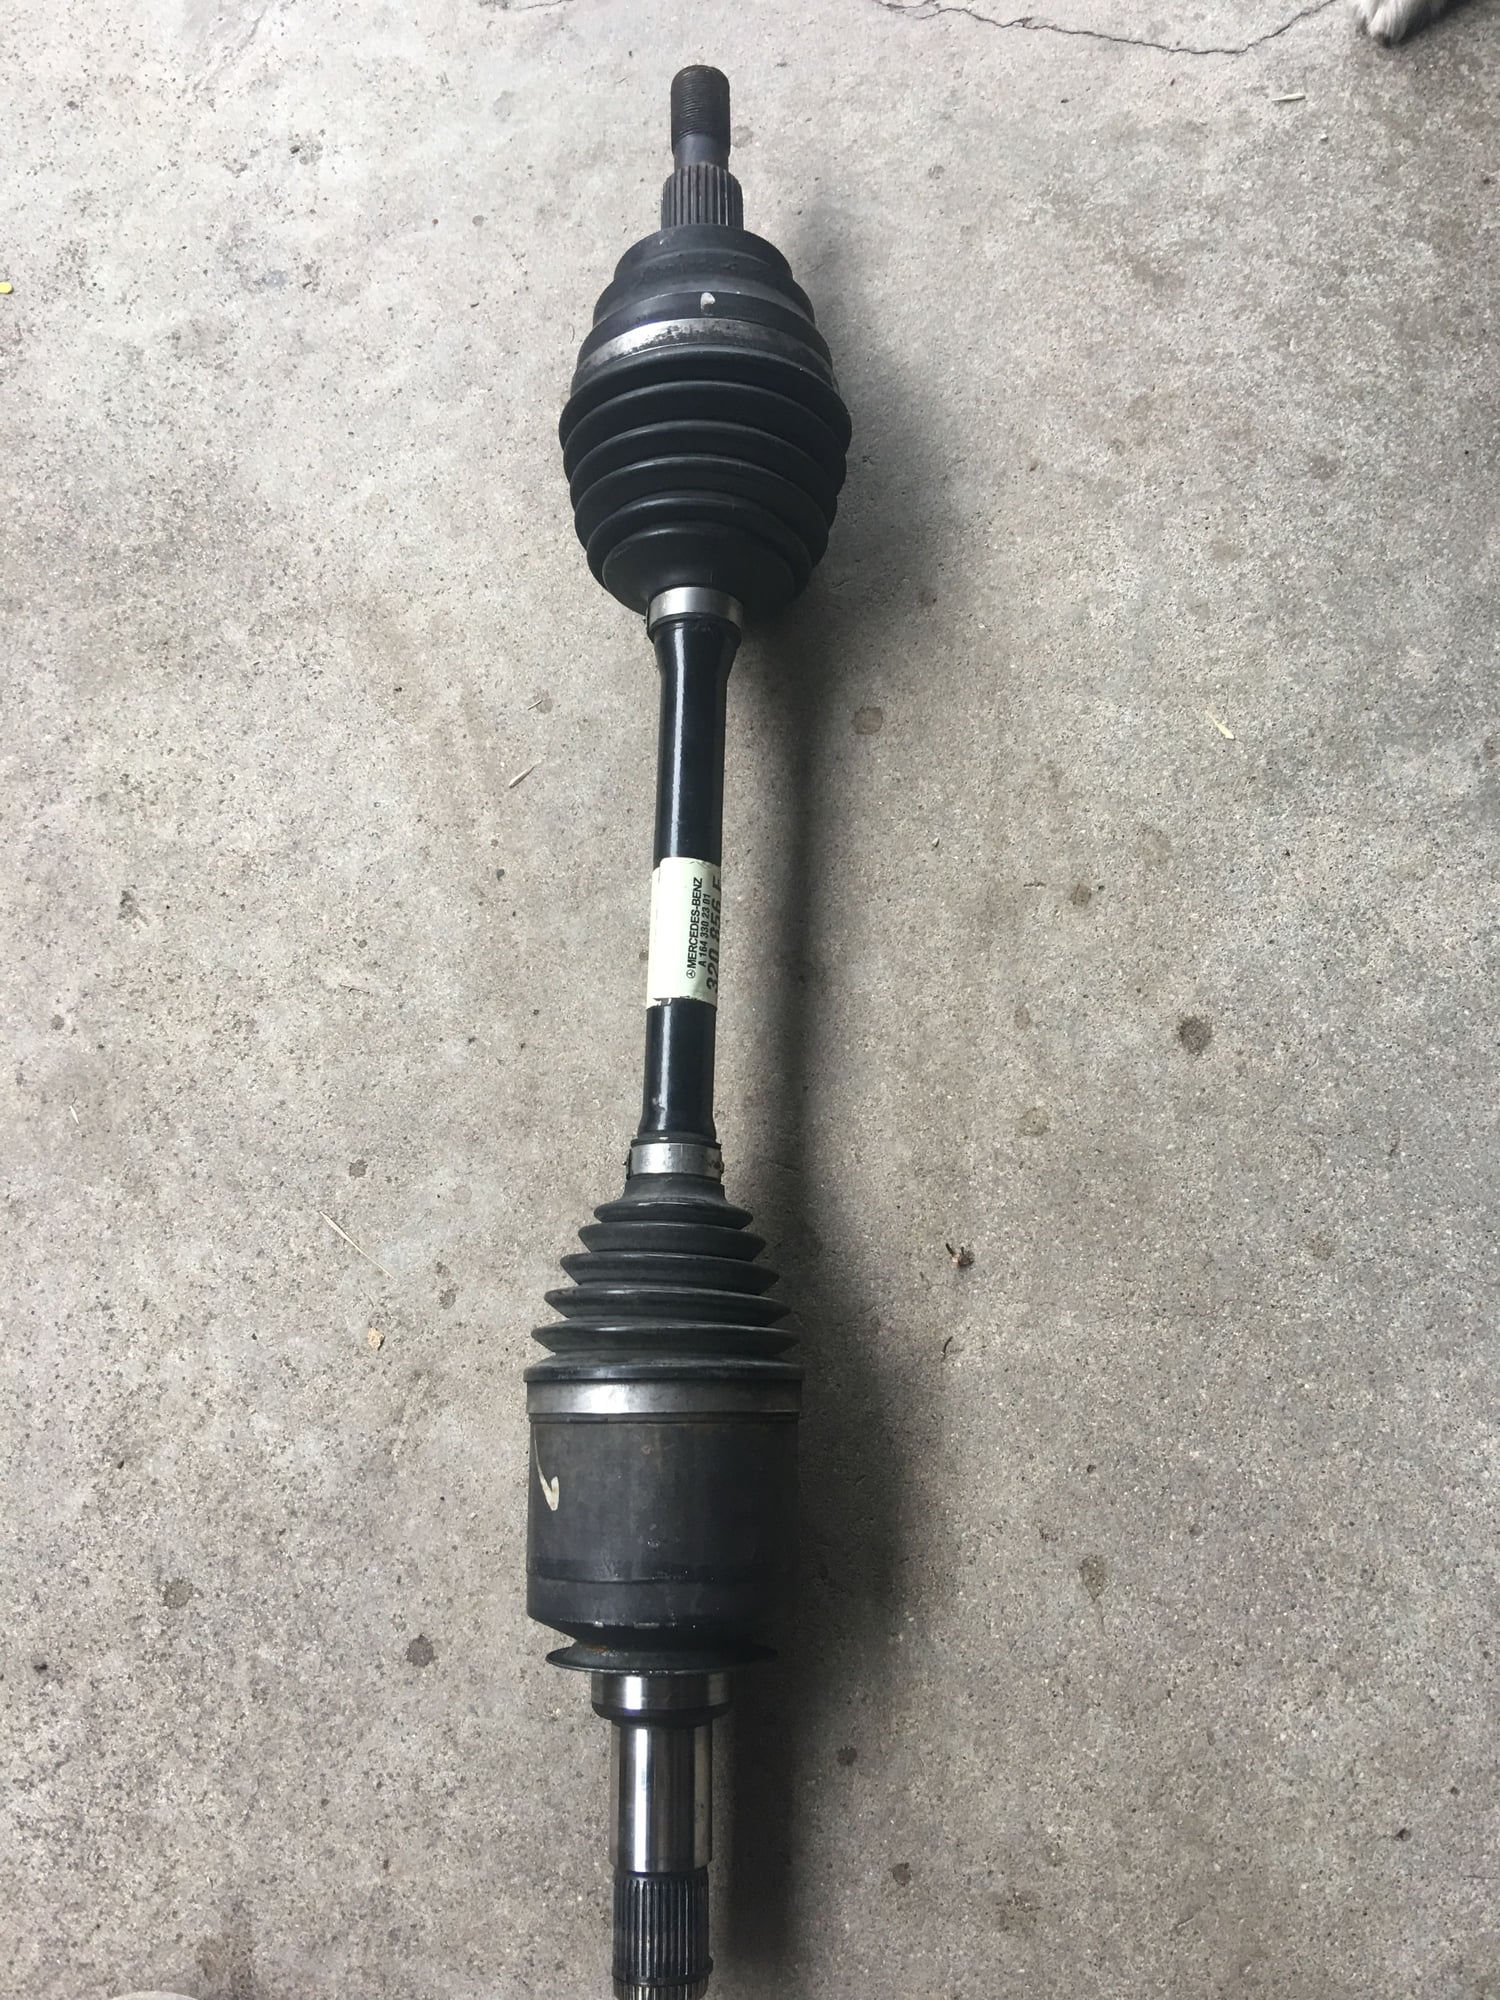 Drivetrain - Front axle drive shaft: 164 body type 164 330 23 01 - Used - San Diego, CA 92125, United States